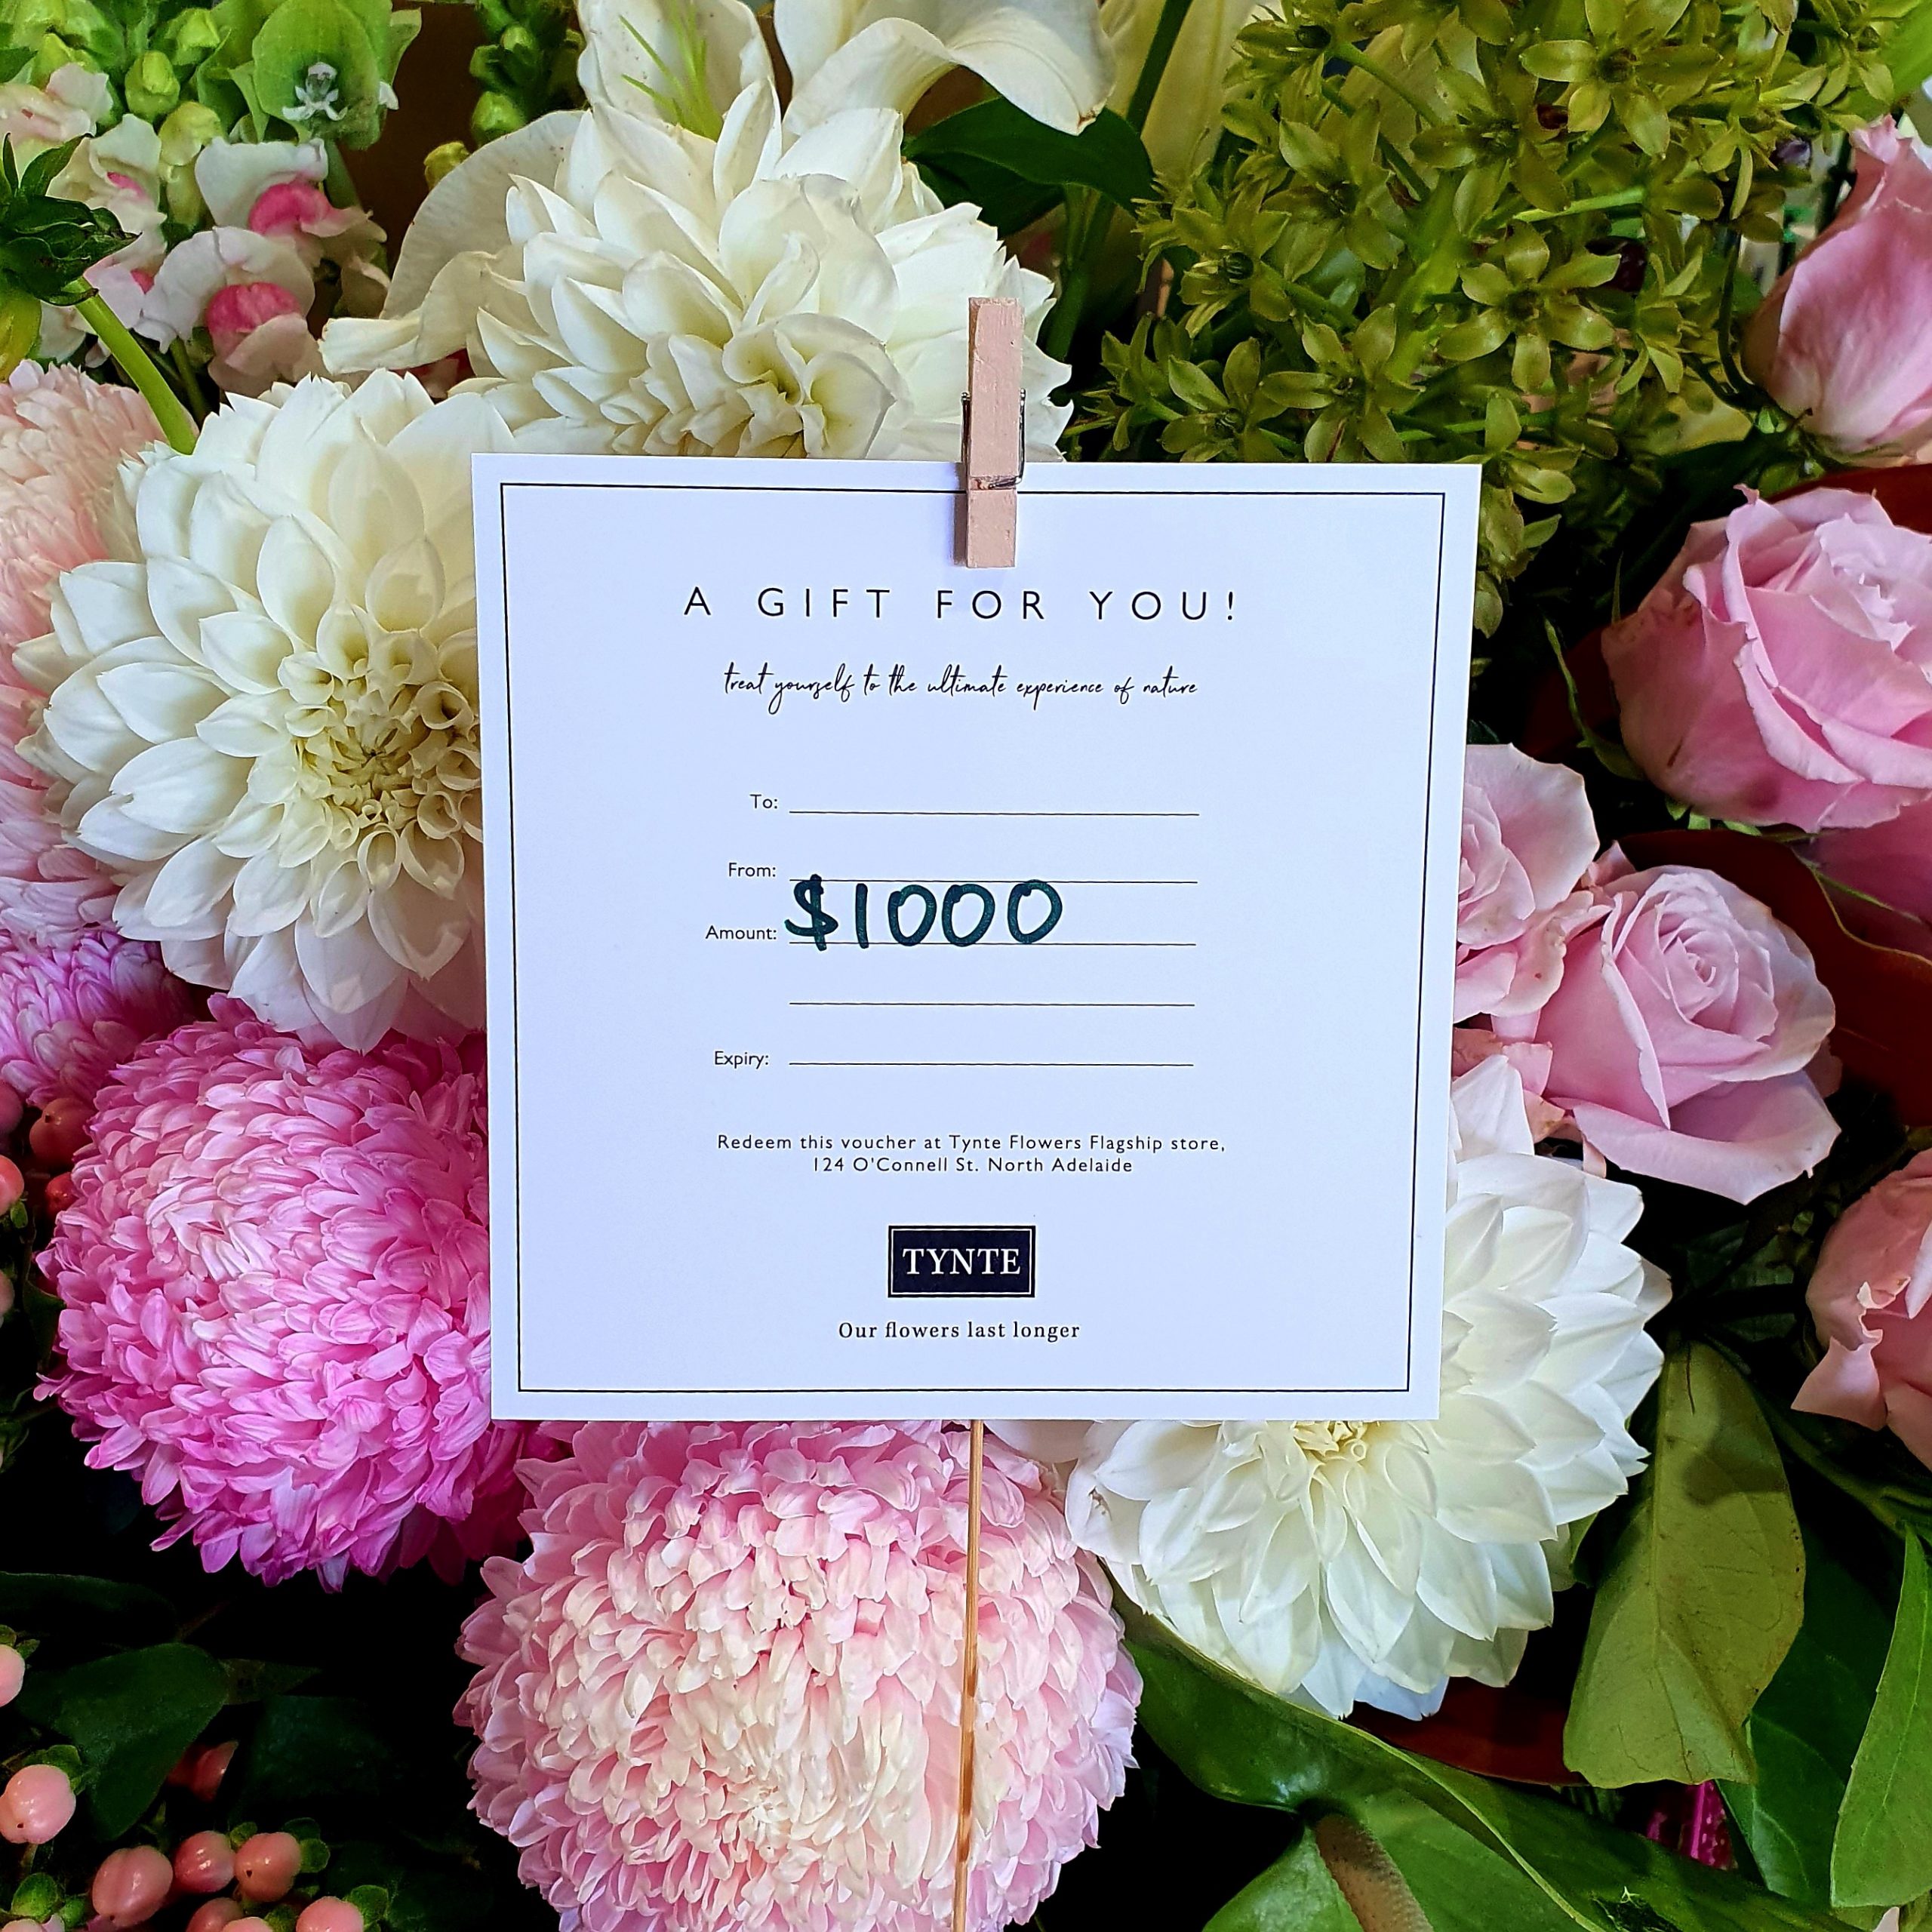 WIN $1,000 to spend on beautiful blooms at Tynte Flowers